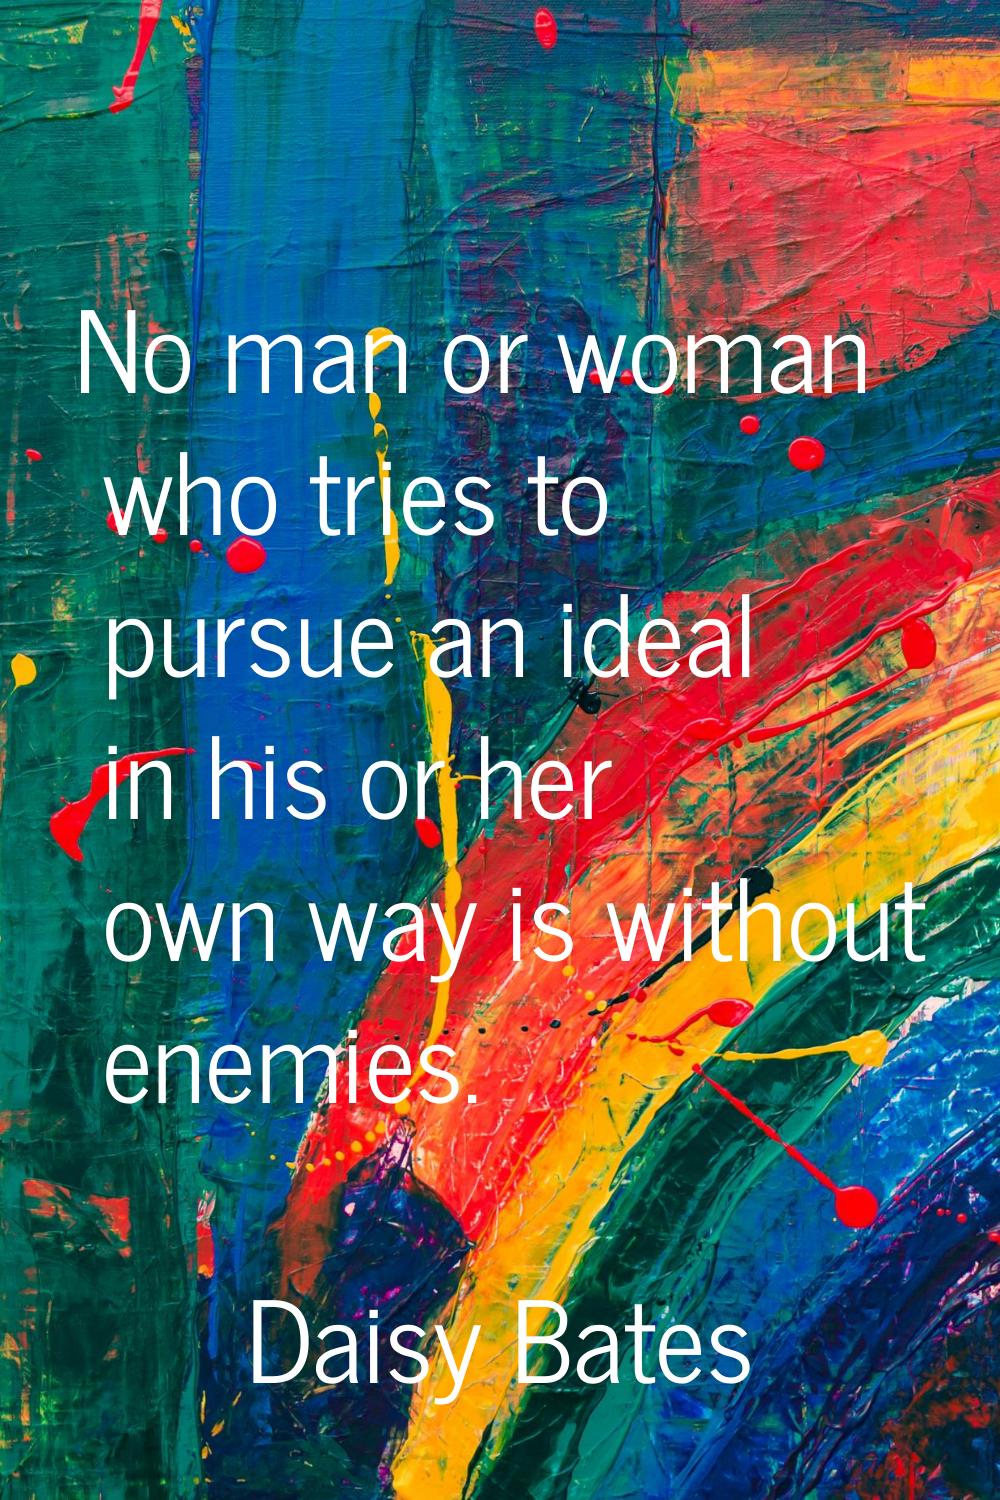 No man or woman who tries to pursue an ideal in his or her own way is without enemies.